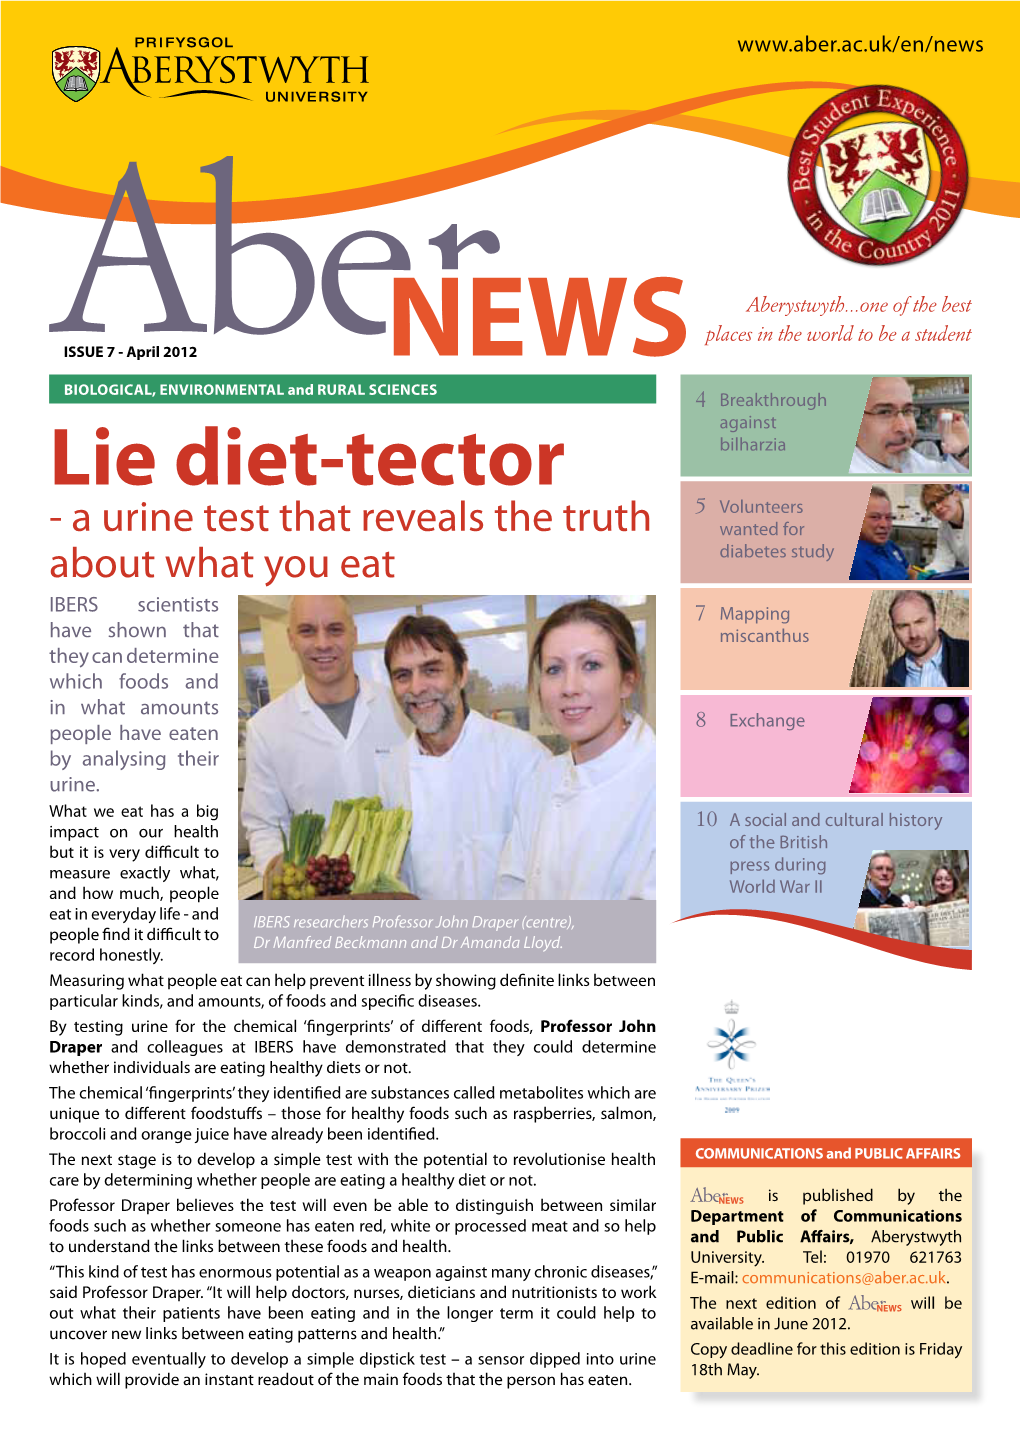 Issue 7 of Aber News